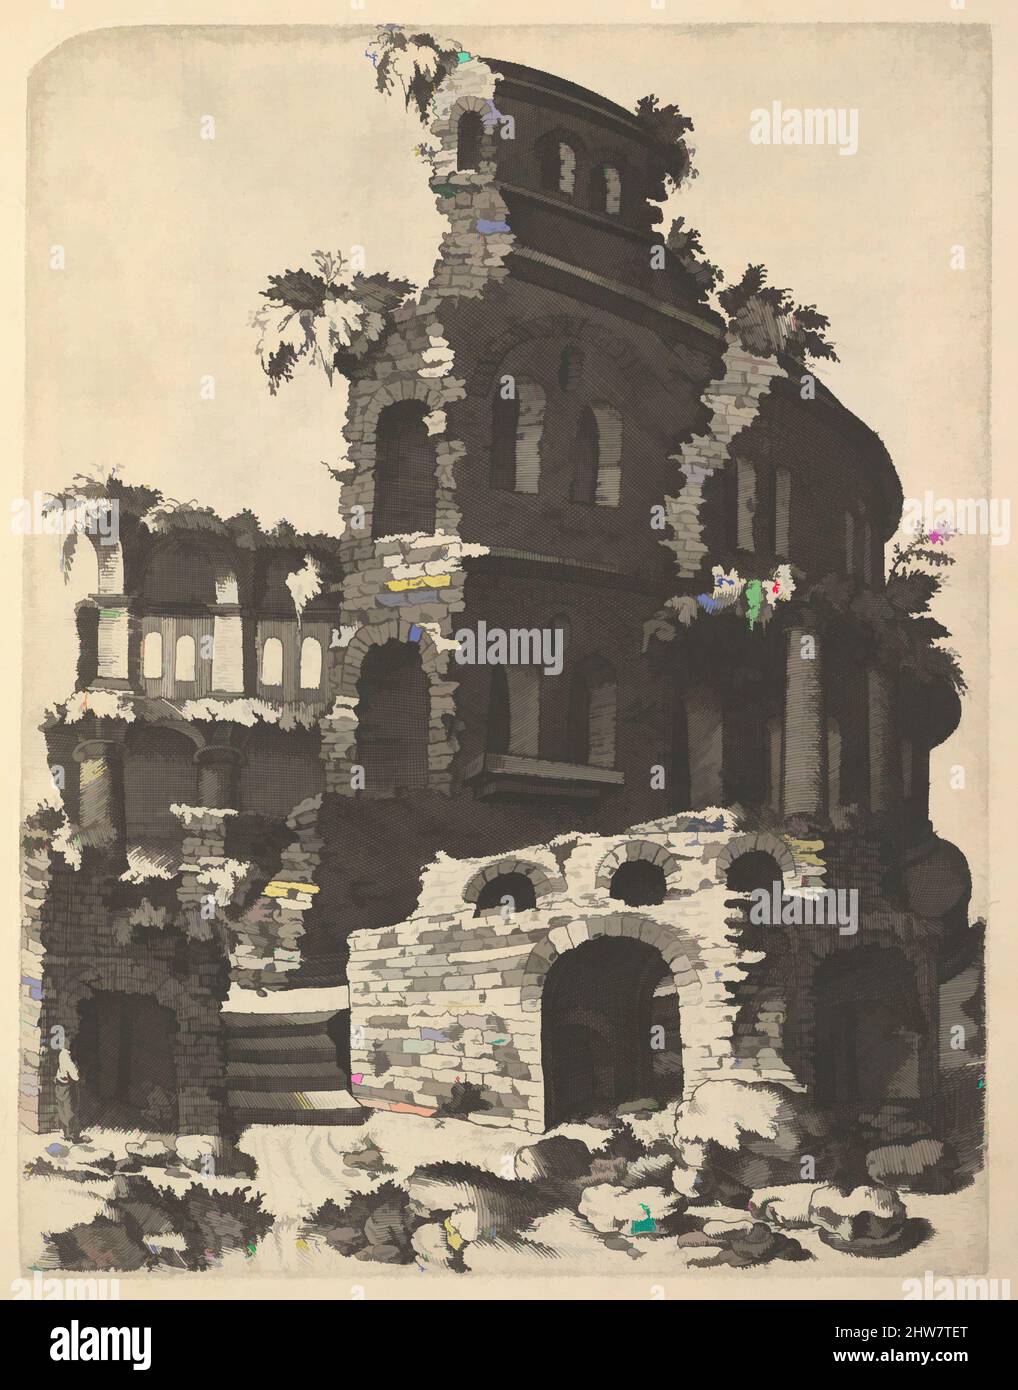 Art inspired by Ruins of a Basilica (?) from the series 'Ruinarum variarum fabricarum delineationes pictoribus caeterisque id genus artificibus multum utiles', ca. 1572, Etching, Plate: 7 11/16 x 6 in. (19.6 x 15.2 cm), Lambert Suavius (Netherlandish, ca. 1510–by 1576), Vertical plate, Classic works modernized by Artotop with a splash of modernity. Shapes, color and value, eye-catching visual impact on art. Emotions through freedom of artworks in a contemporary way. A timeless message pursuing a wildly creative new direction. Artists turning to the digital medium and creating the Artotop NFT Stock Photo